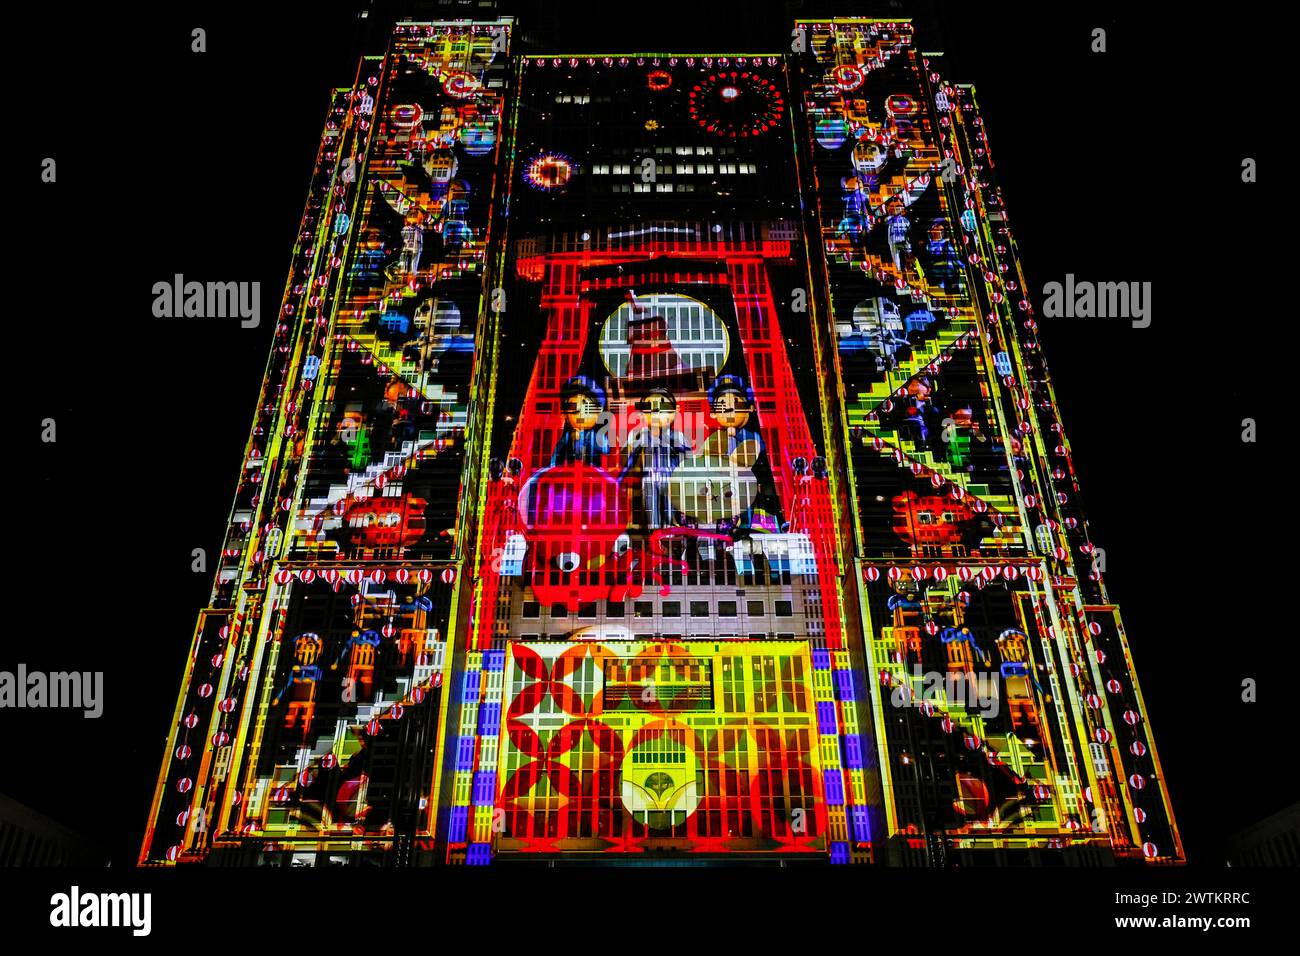 WORLD LARGEST PROJECTION MAPPING SHOW IN SHINJUKU TOKYO Stock Photo